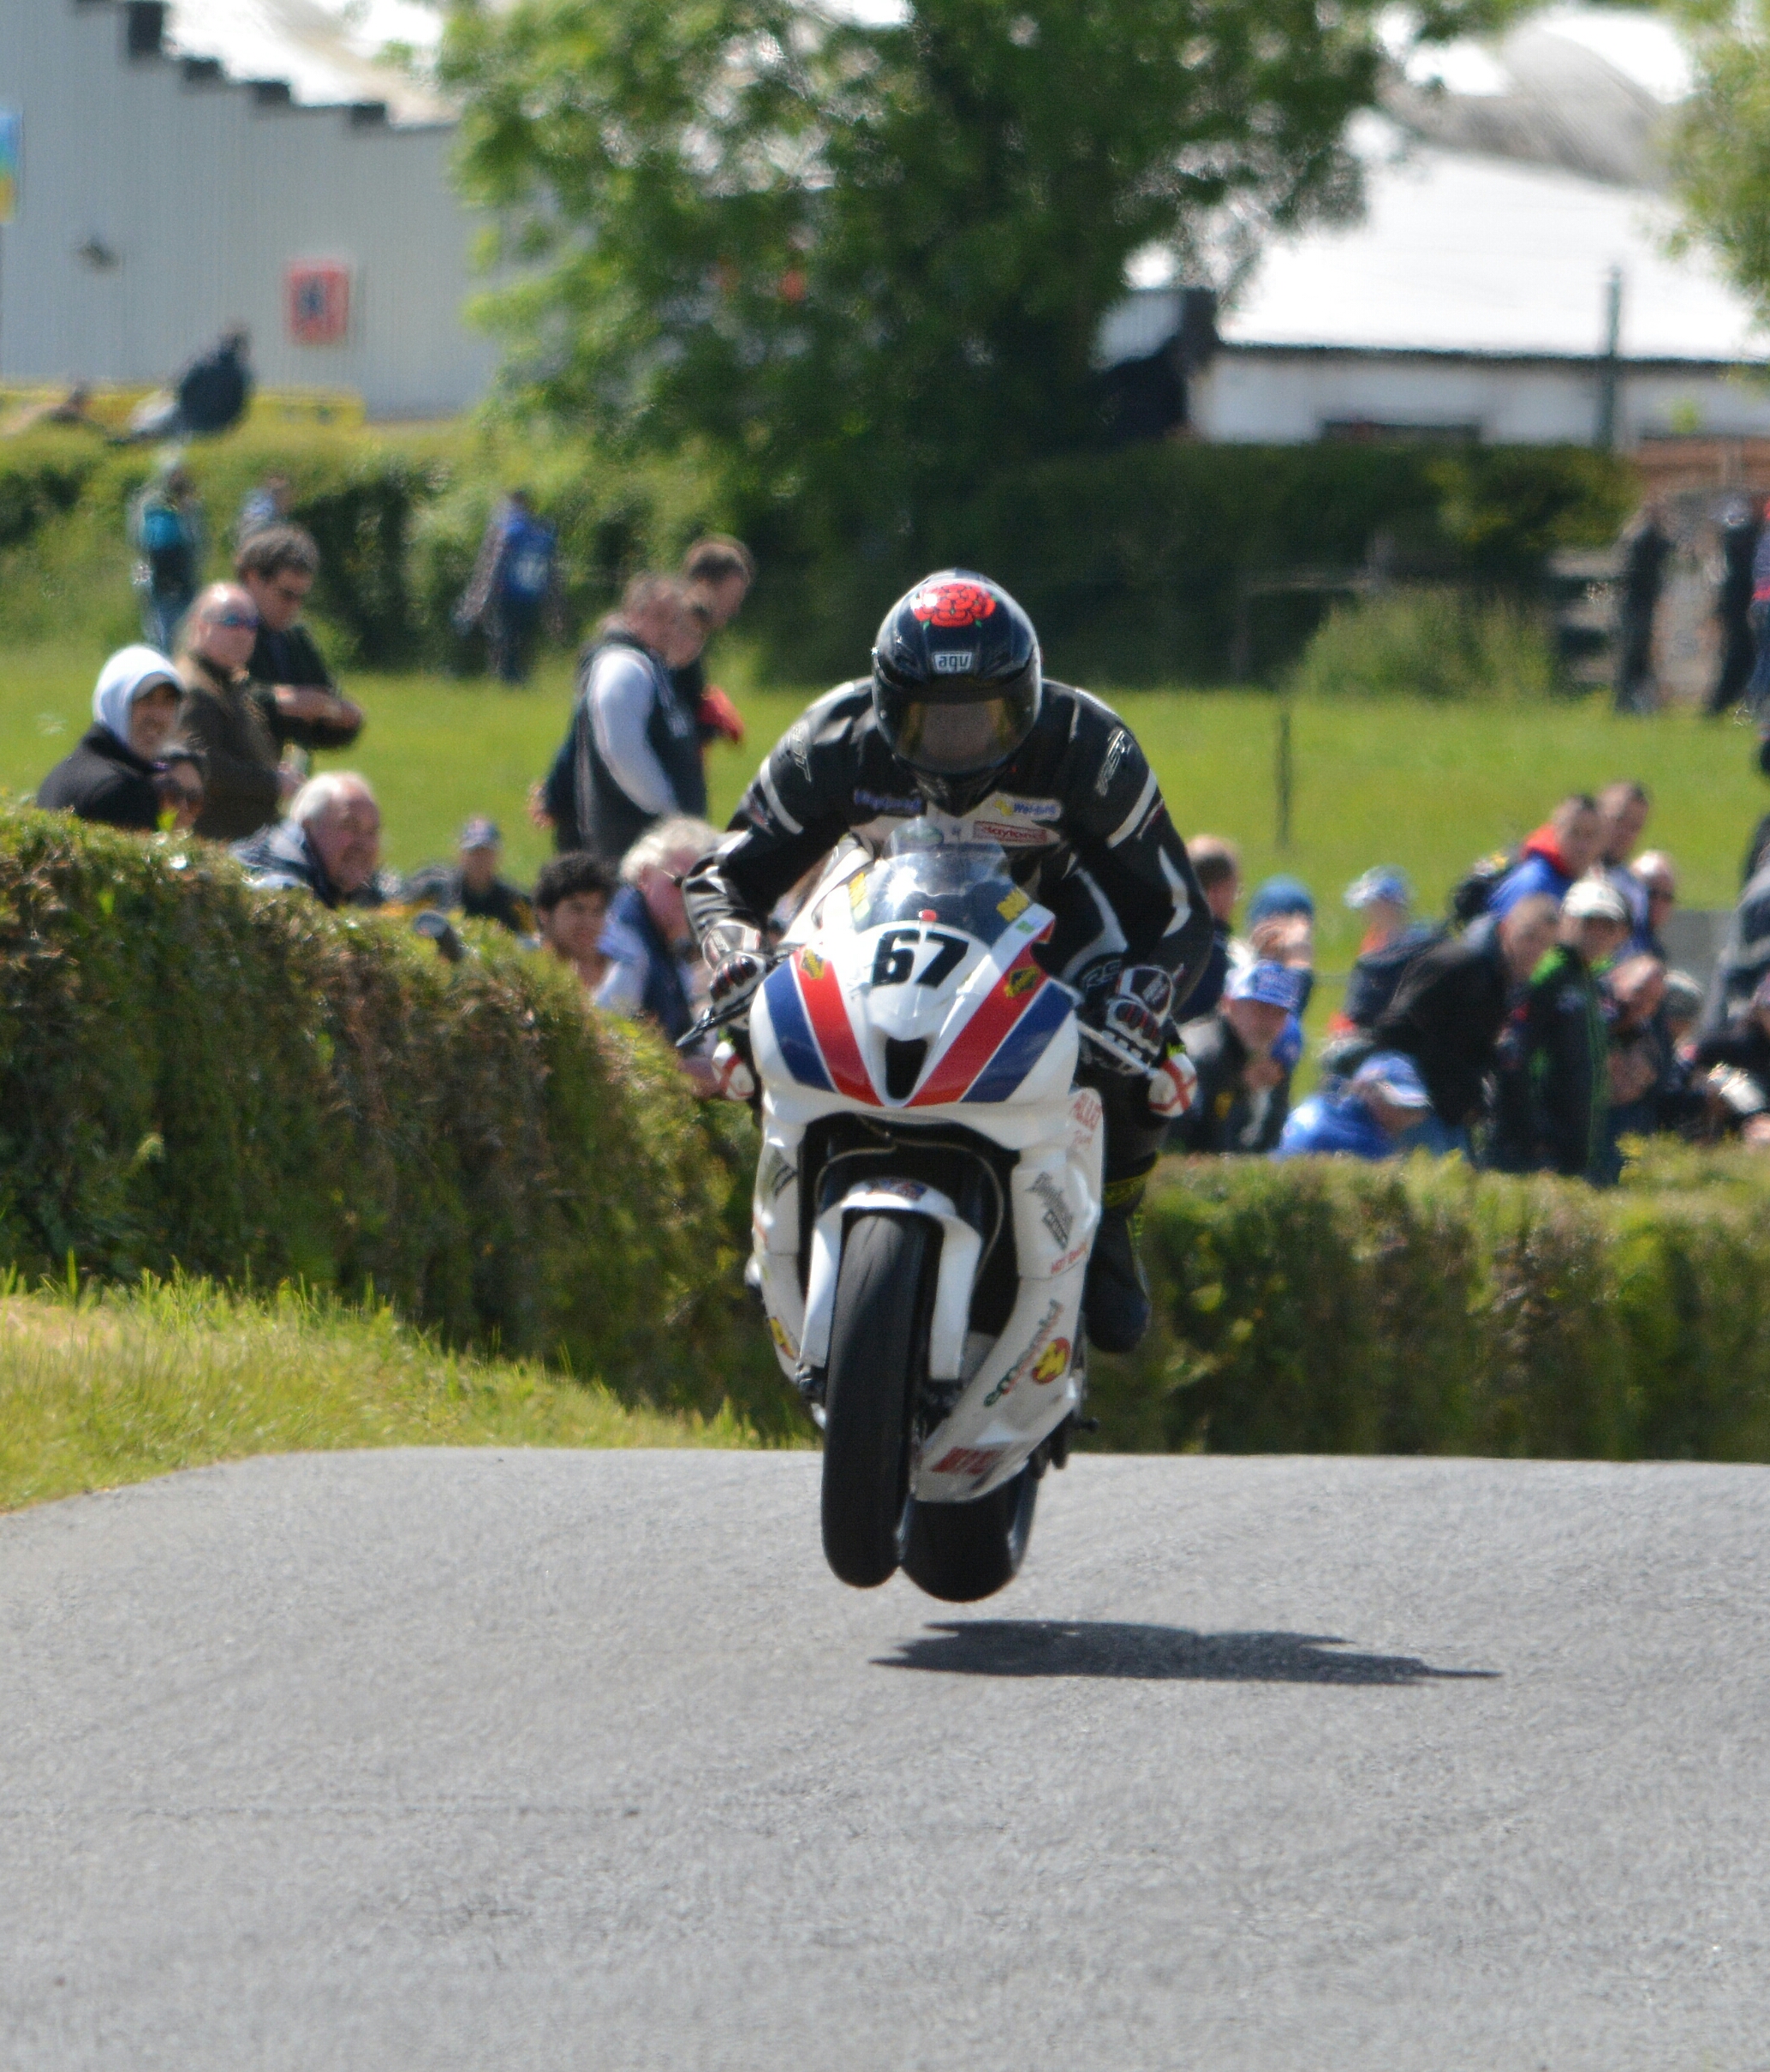 Gavin Brown Aiming To Keep Up Great Form – Road Racing News